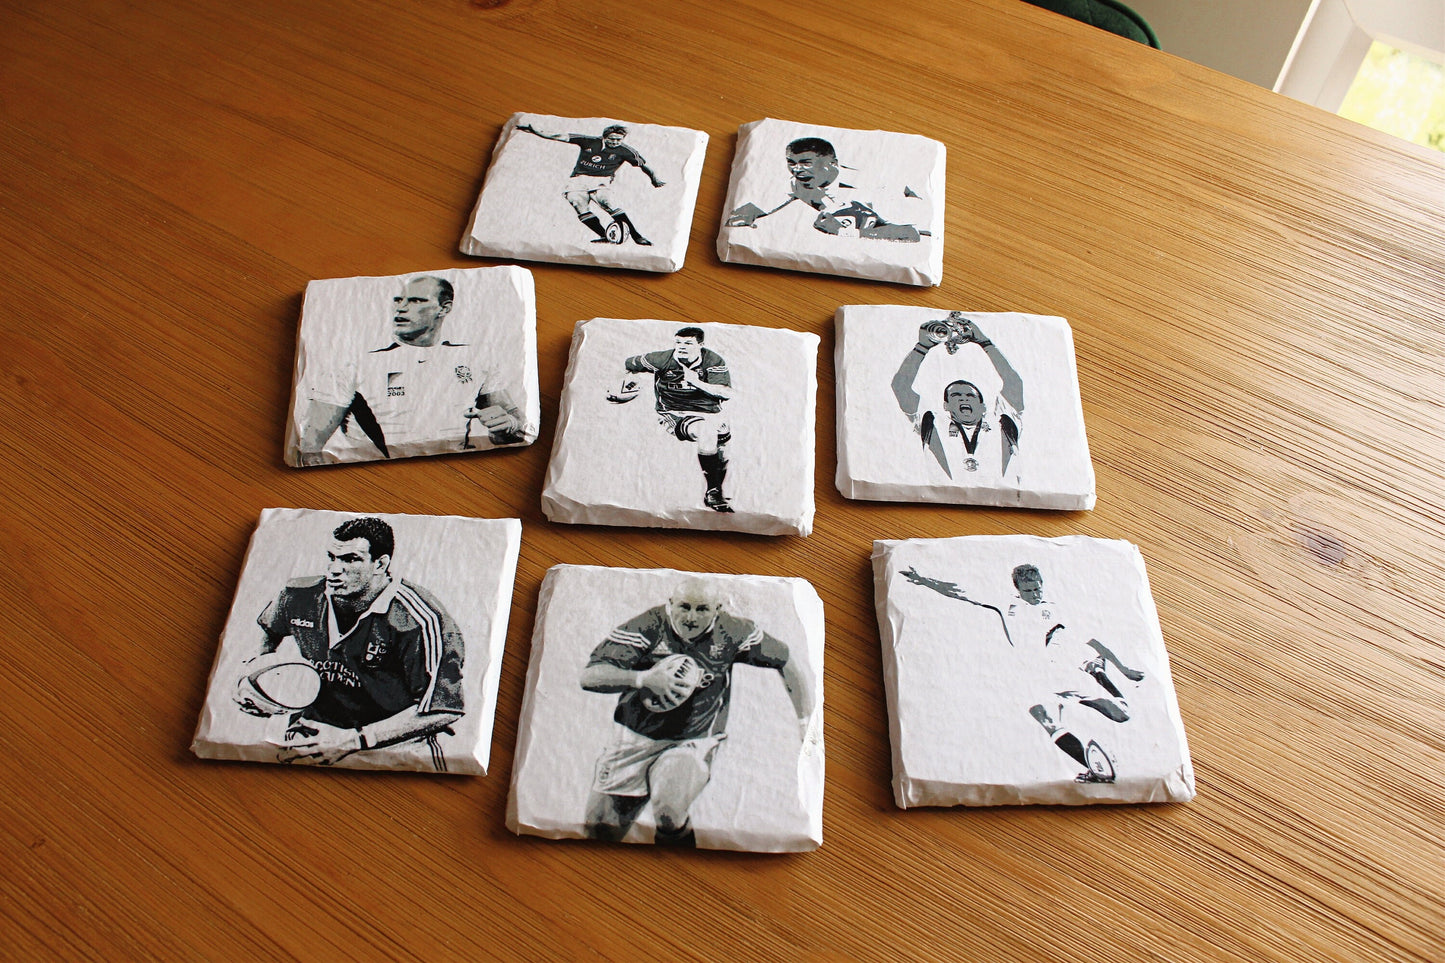 Six Nations Rugby Gift Coasters. Home Bar. Beer Mats. England Rugby. Wales Rugby. Ireland Rugby. Scotland Rugby. British and Irish Lions.